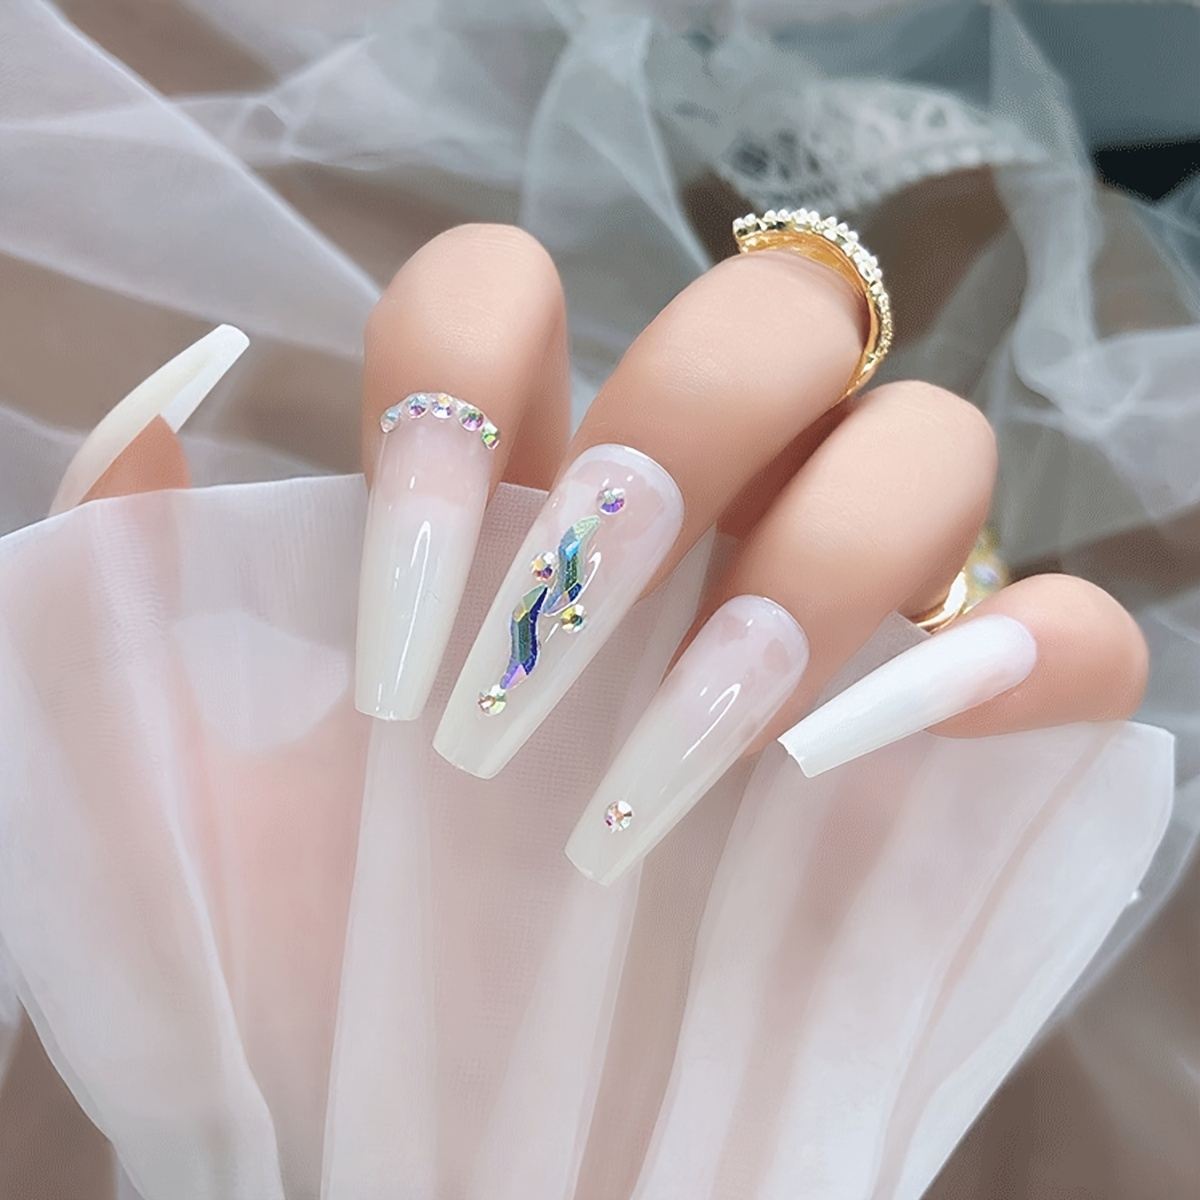 24pcs Press On Nails Medium Coffin Fake Nails White French Tip Ballerina  Acrylic Nails With 3D Bow And Pearl Design Glossy Sweet Valentine's Day  Glue